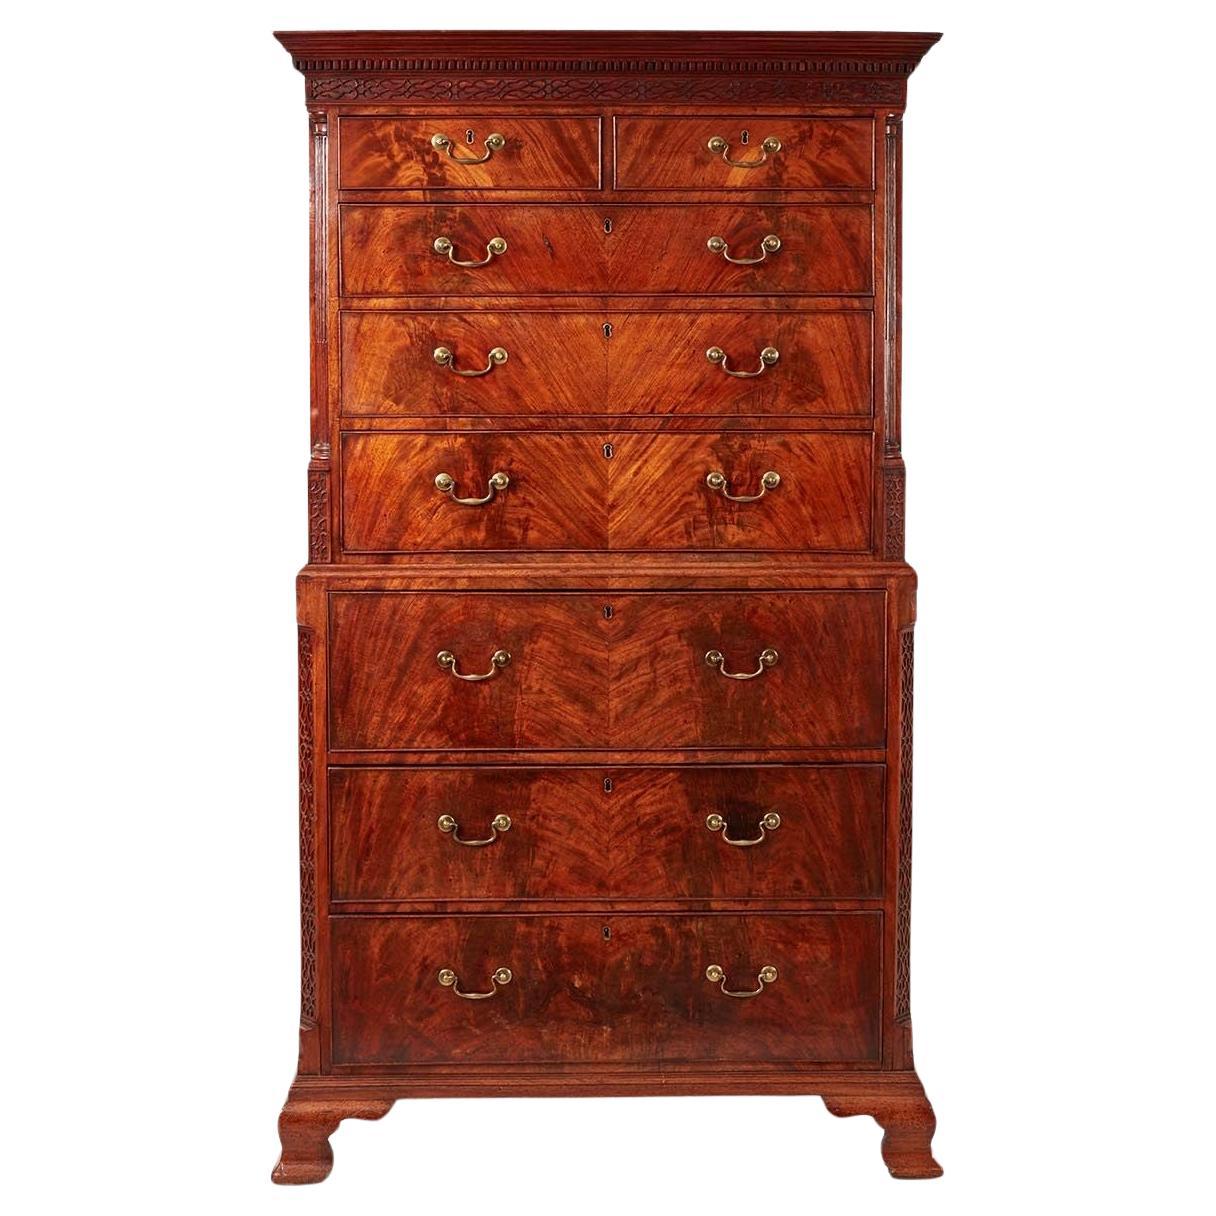 1760s Commodes and Chests of Drawers